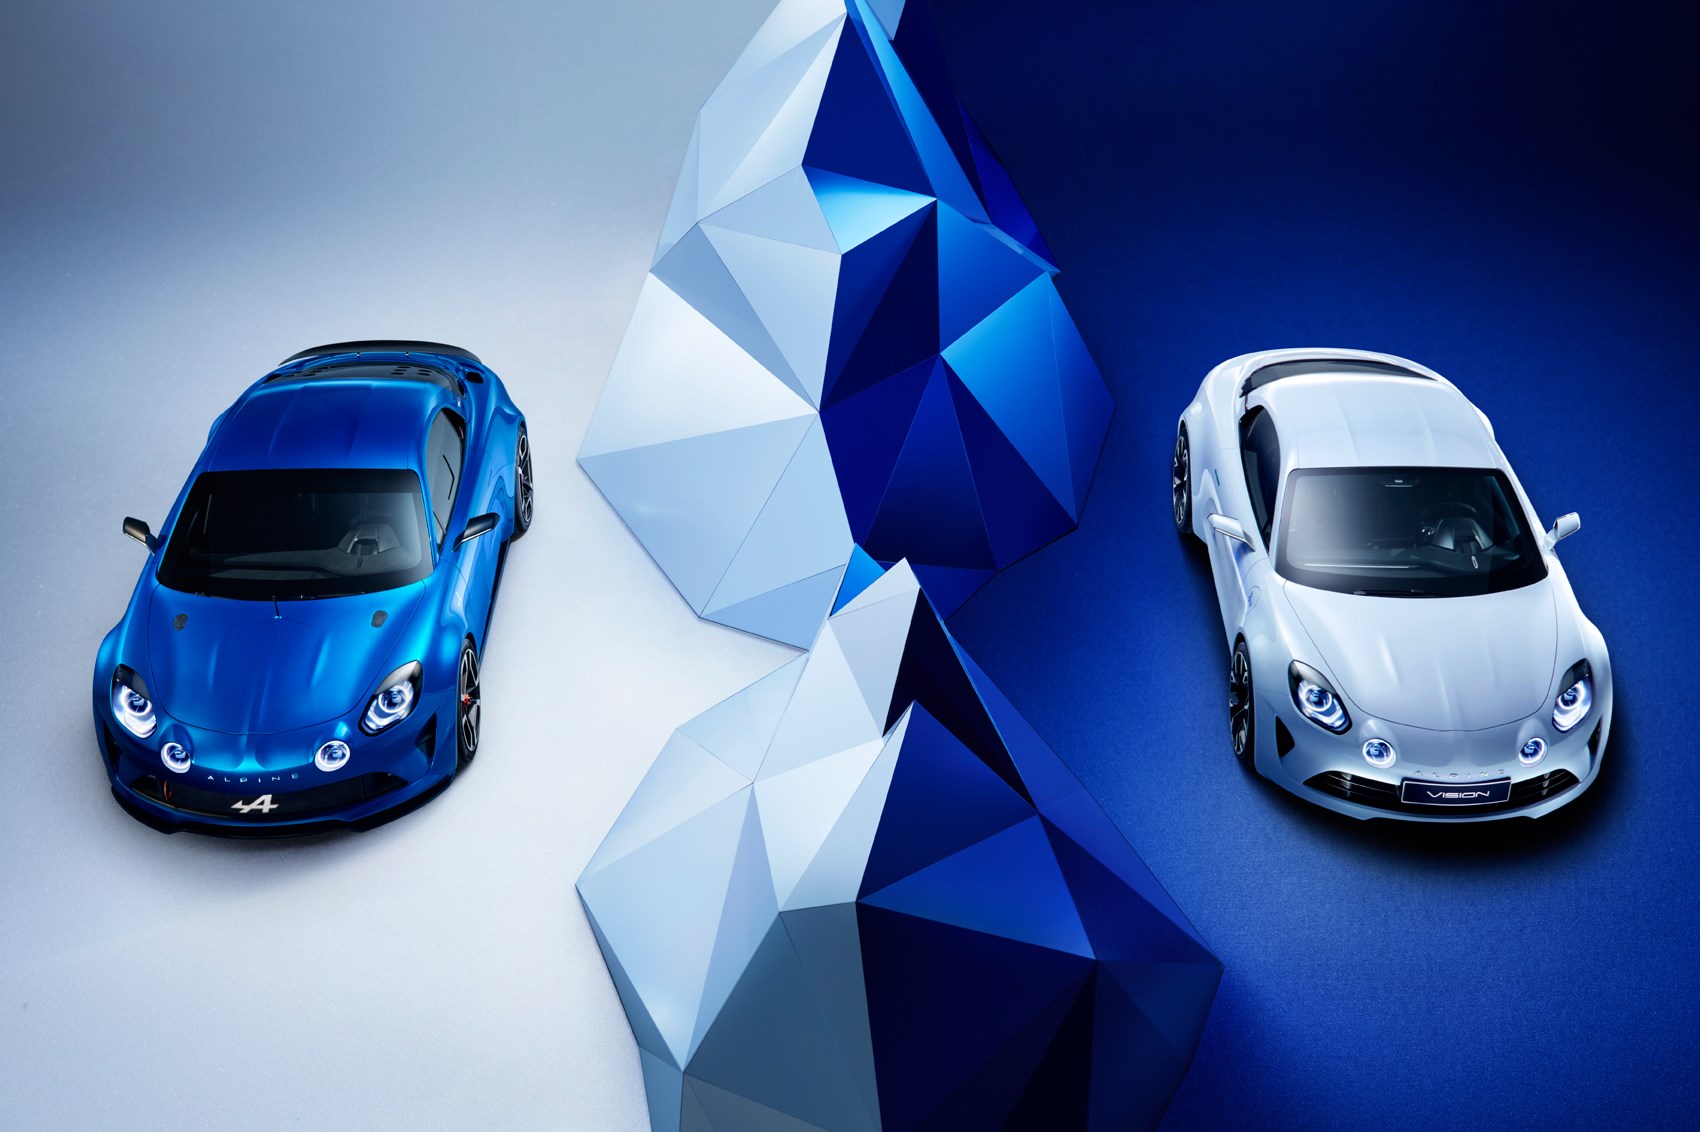 Alpine Vision Concept Wallpapers